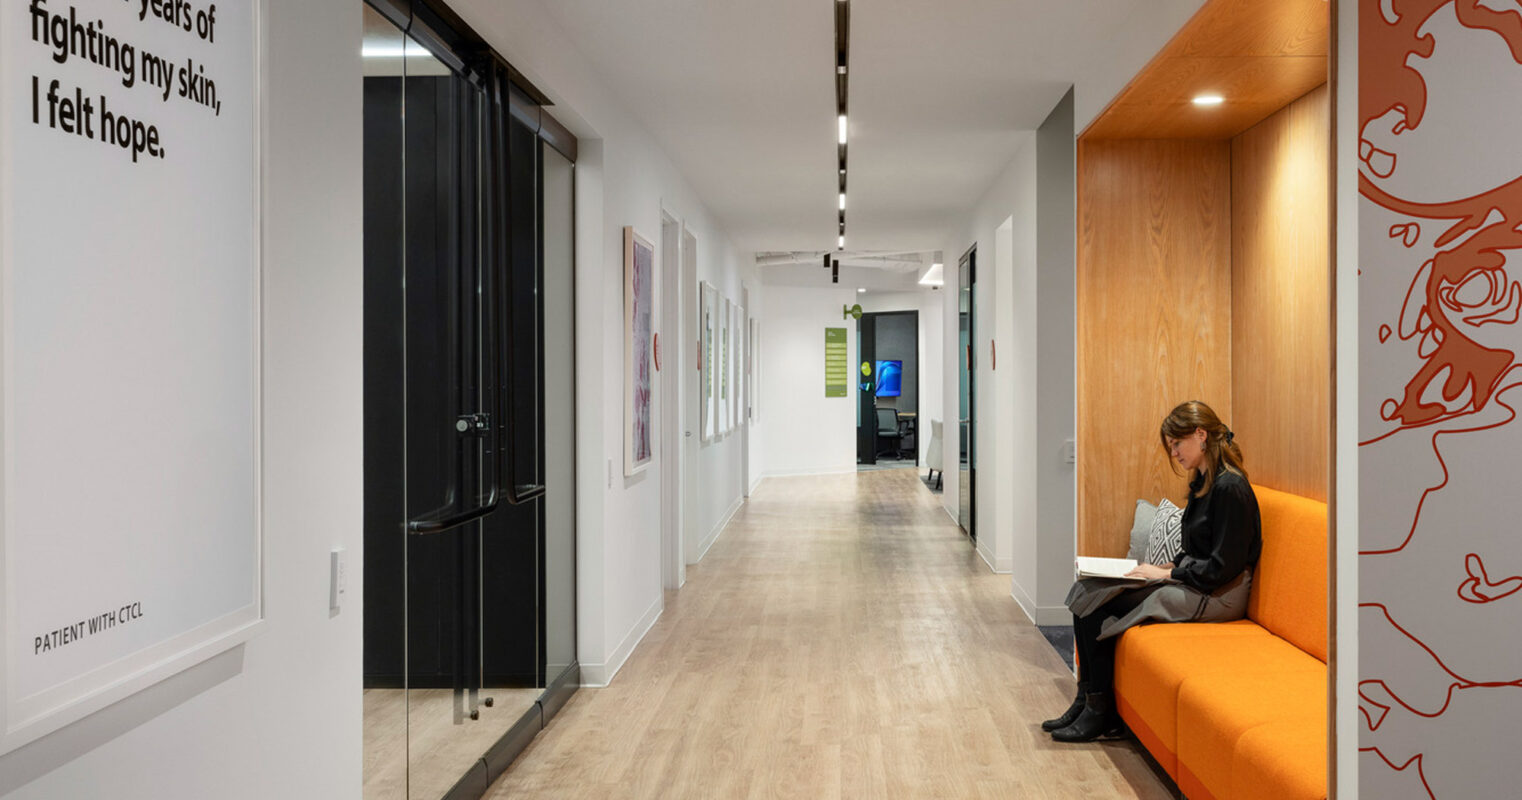 Sleek corridor in a modern healthcare facility featuring warm wood flooring, white walls adorned with framed artwork, and an orange upholstered bench with recessed lighting overhead, providing a serene waiting area adjacent to treatment rooms.